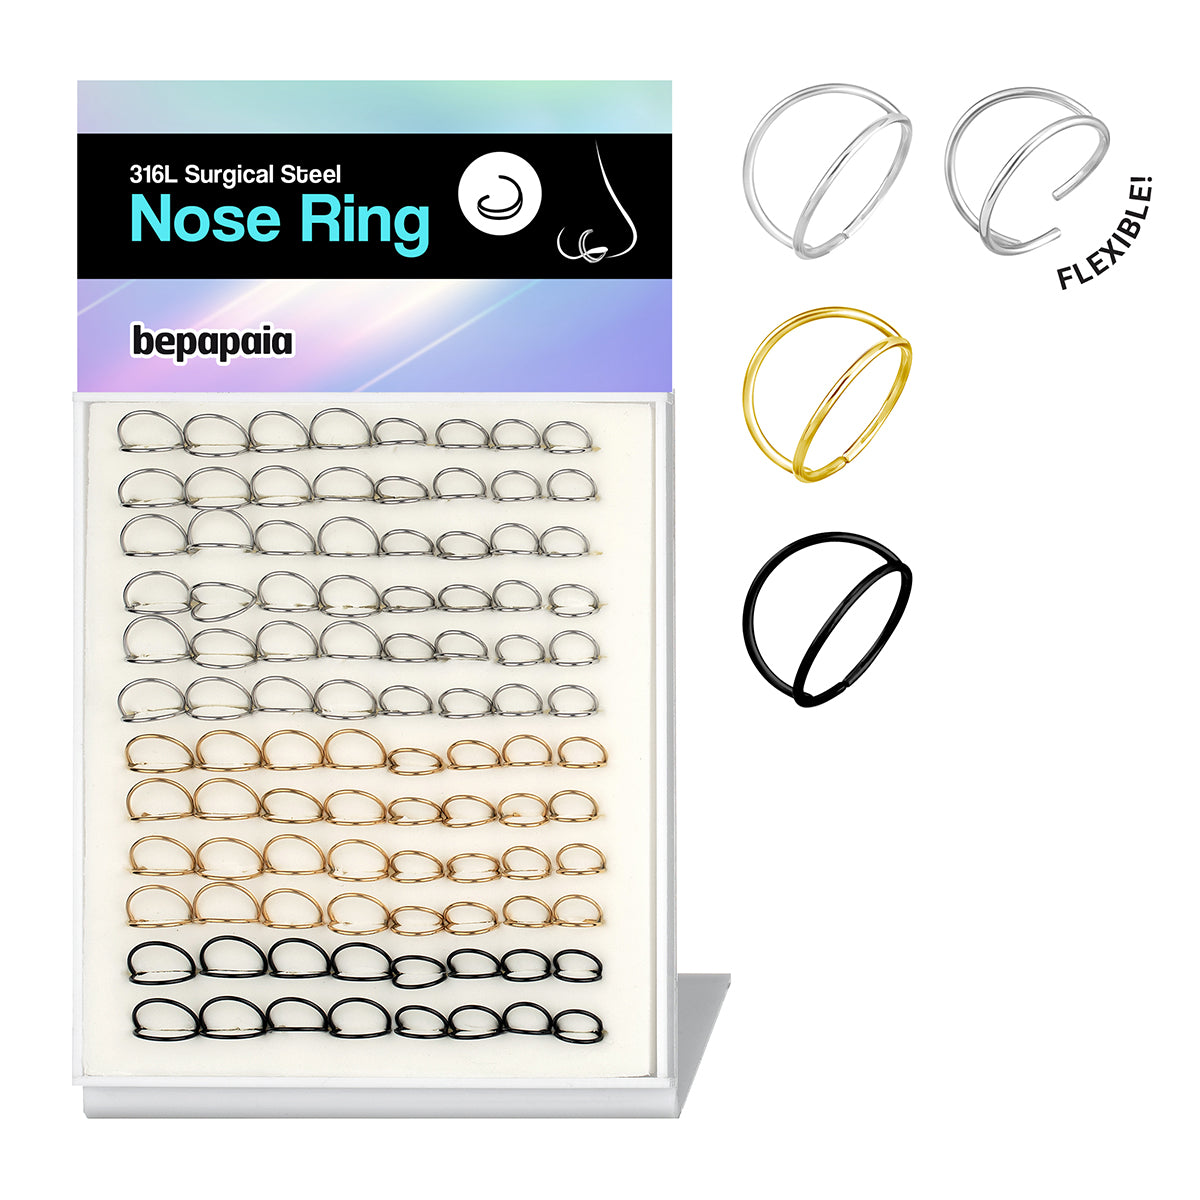 Double flexible nose ring